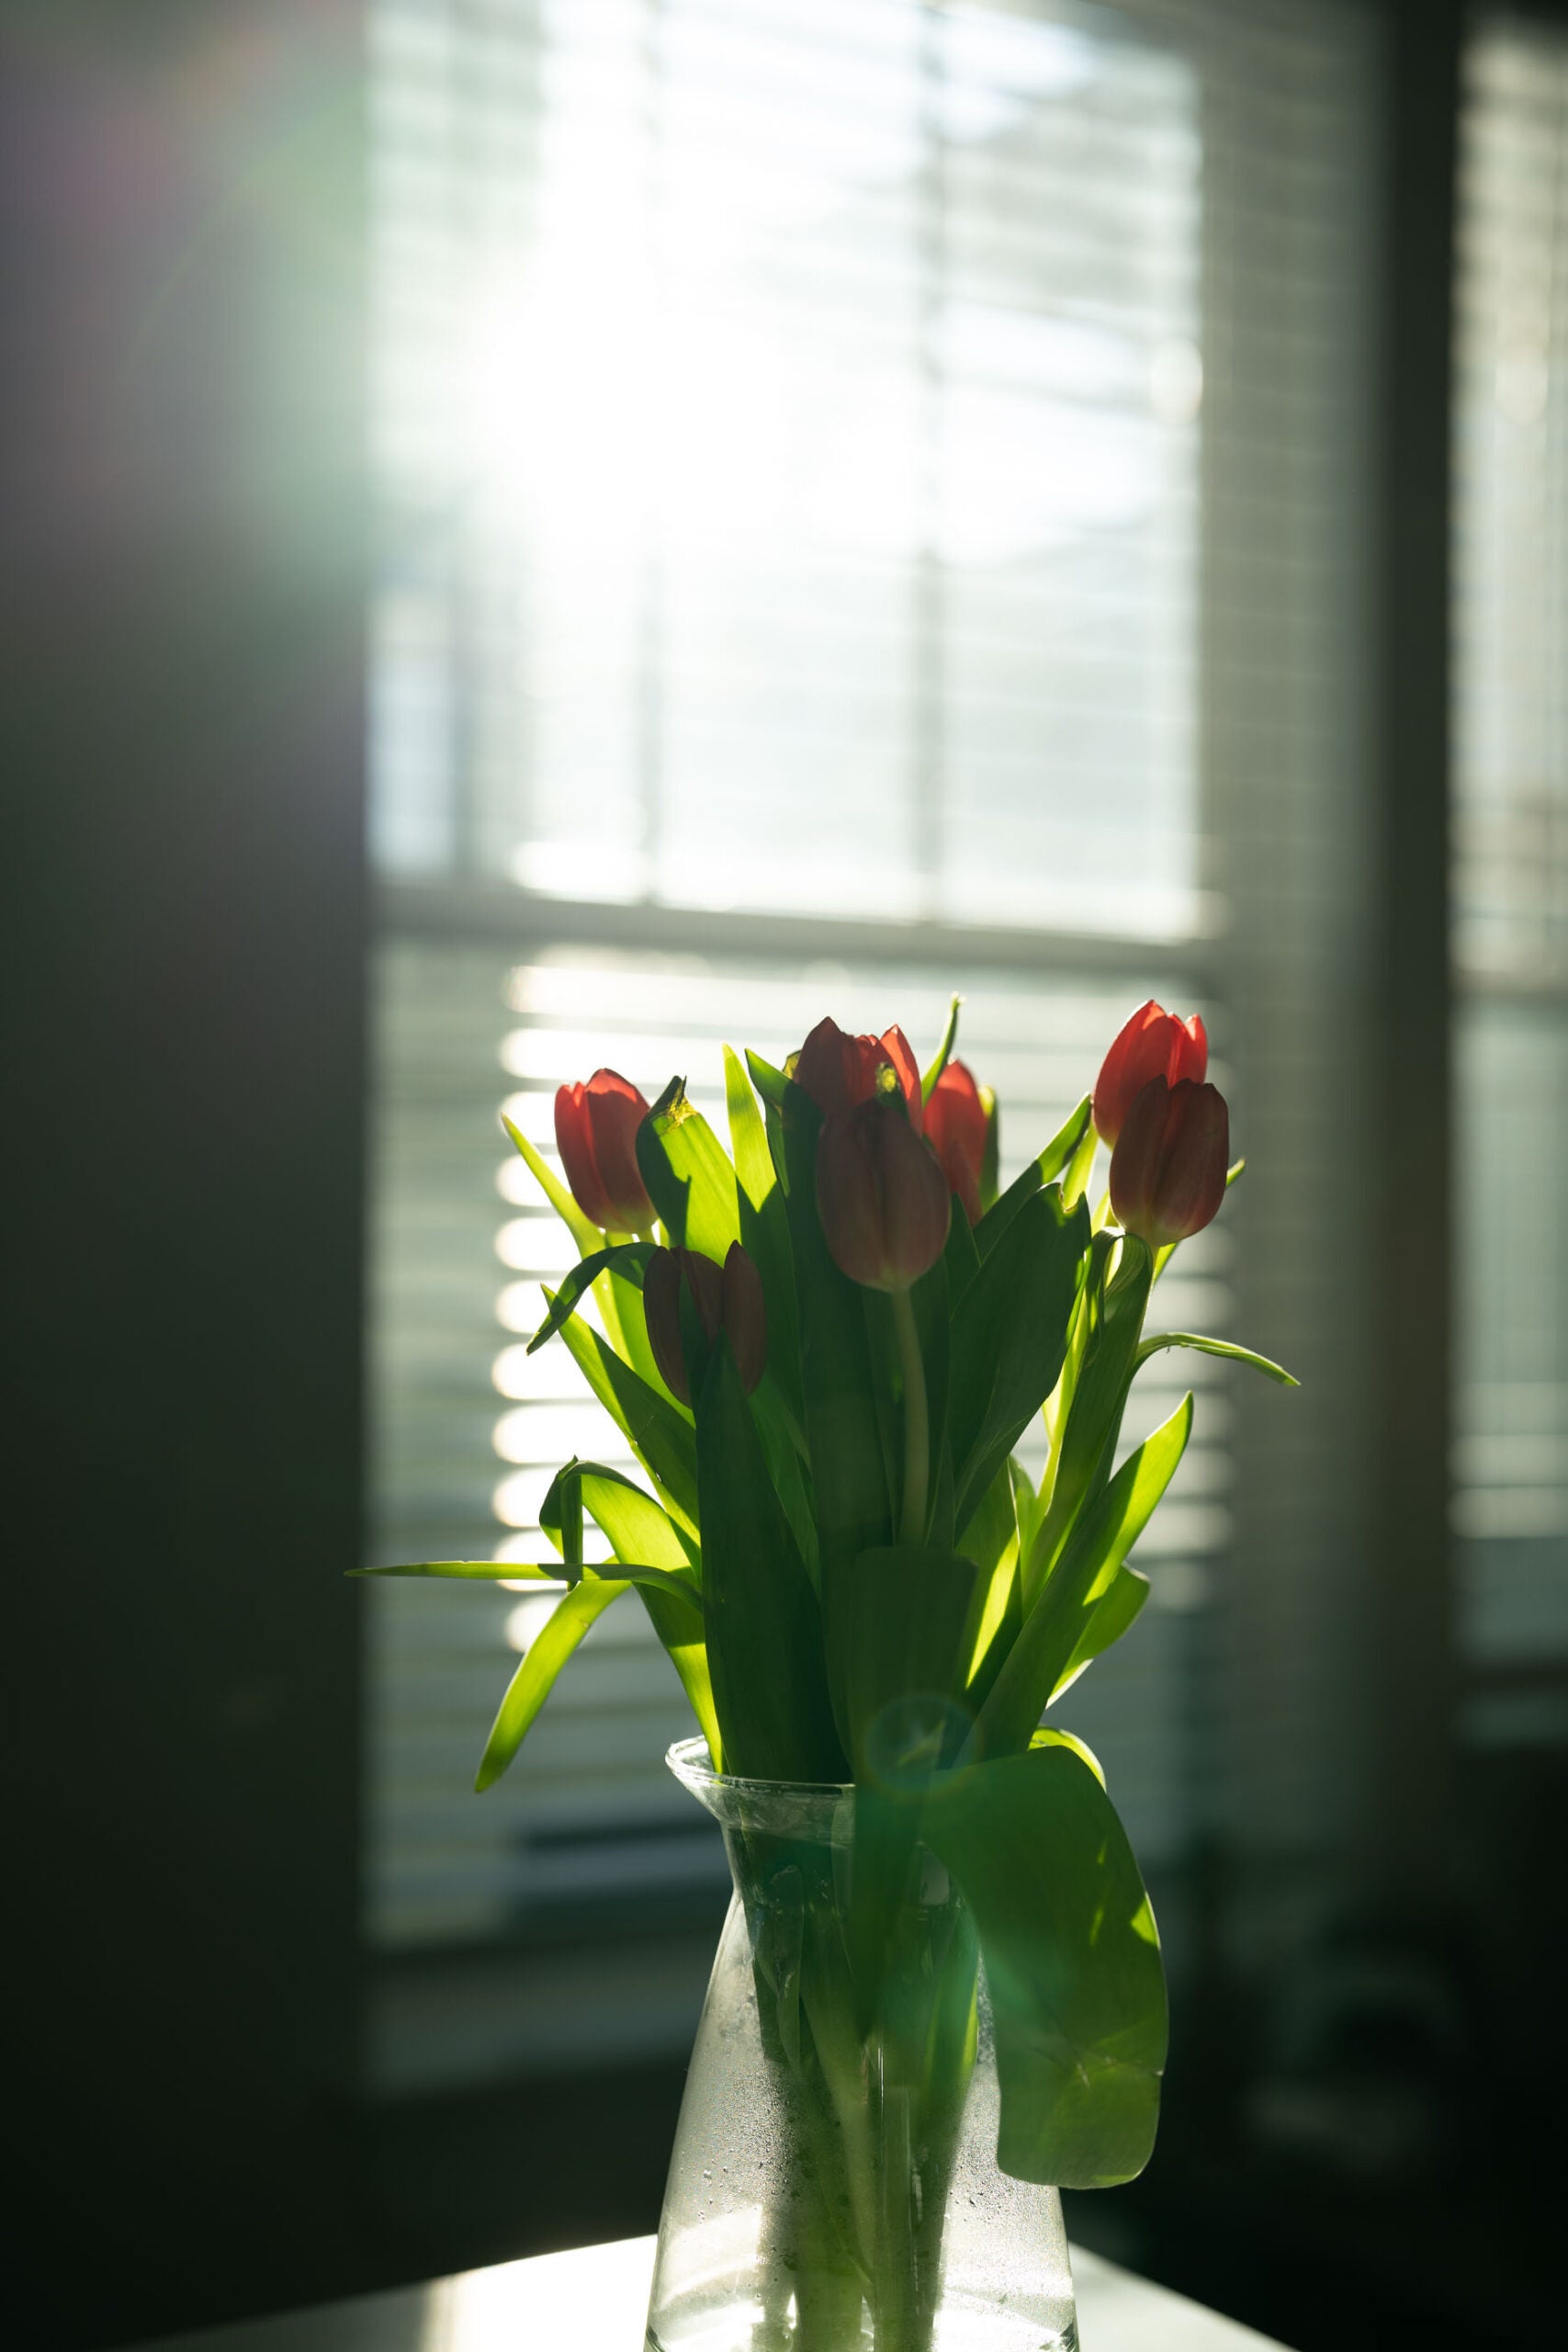 A vase of red tulips in front of a window